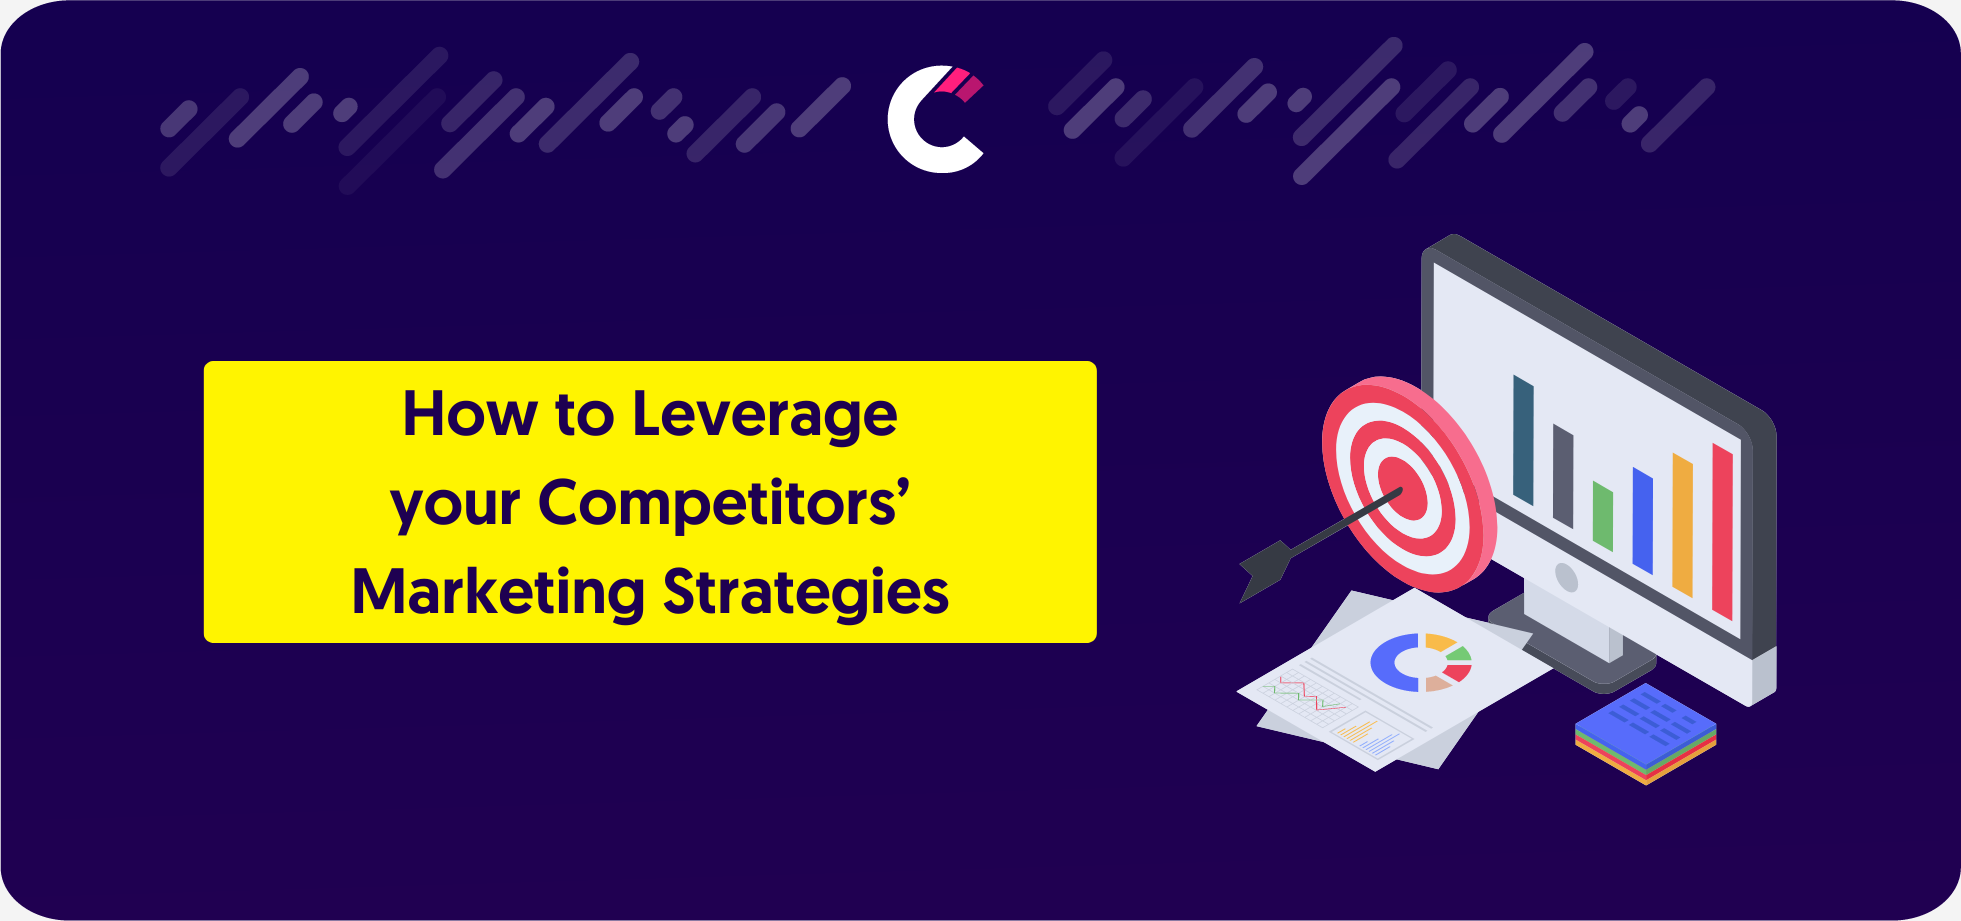 How to Leverage your Competitors’ Marketing Strategies